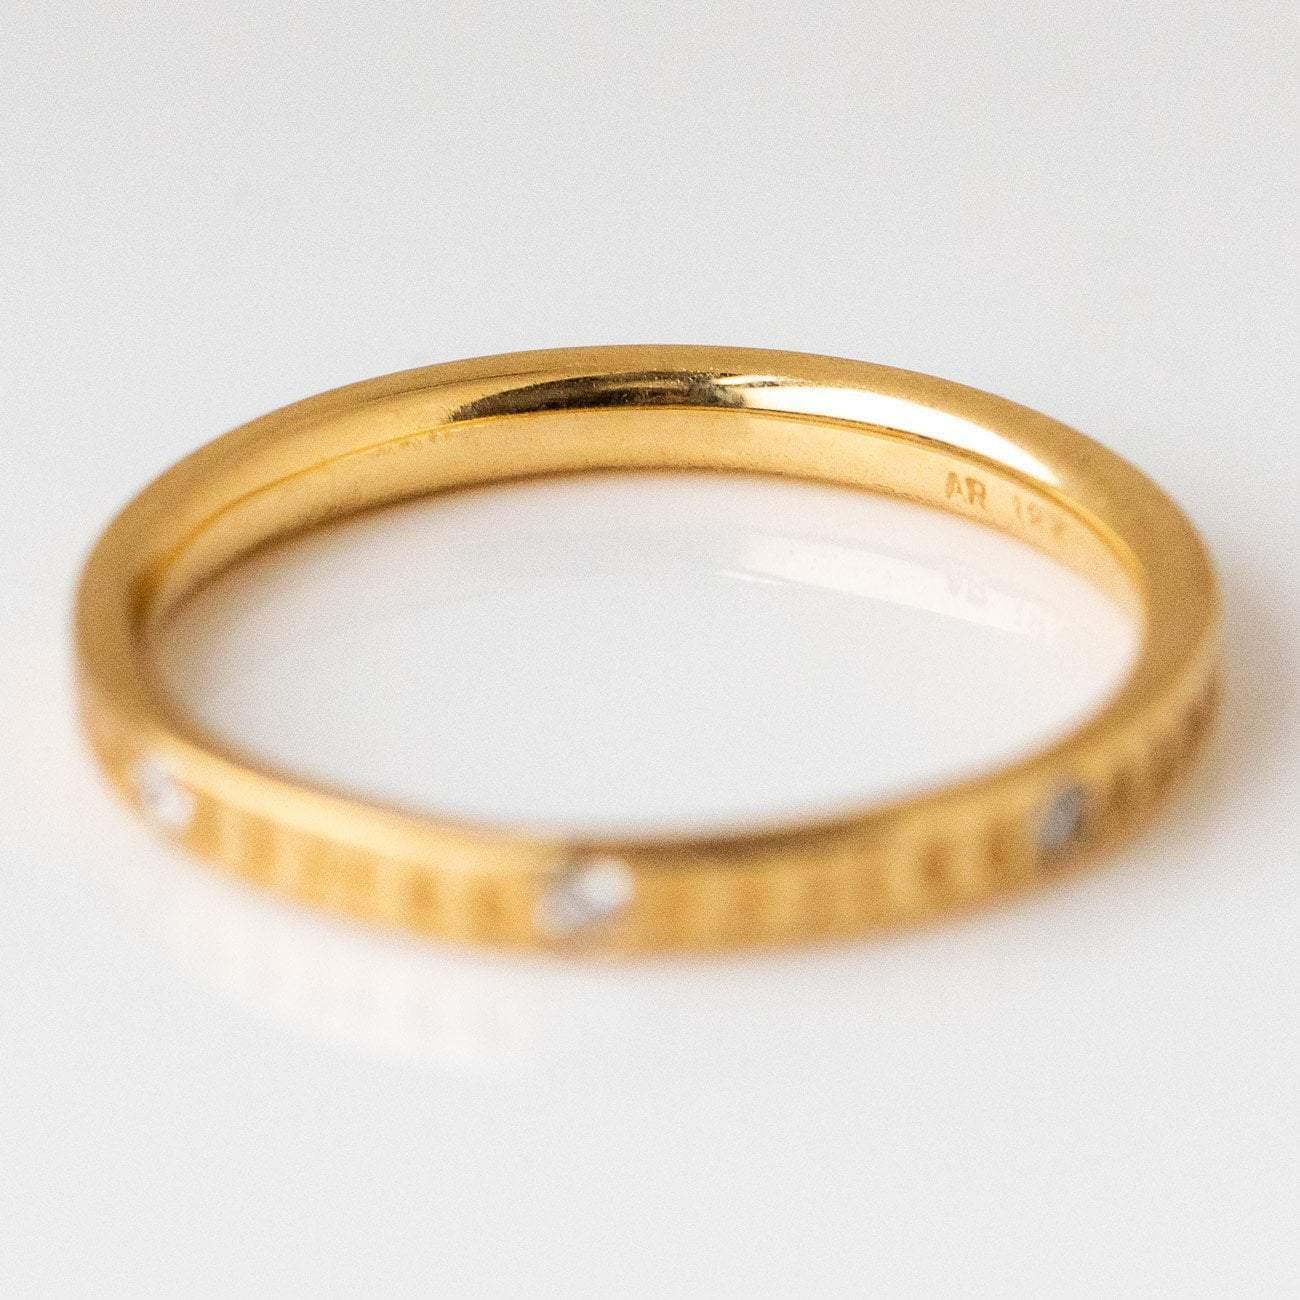 18k solid yellow gold moon phase ring full moon diamonds engraved band